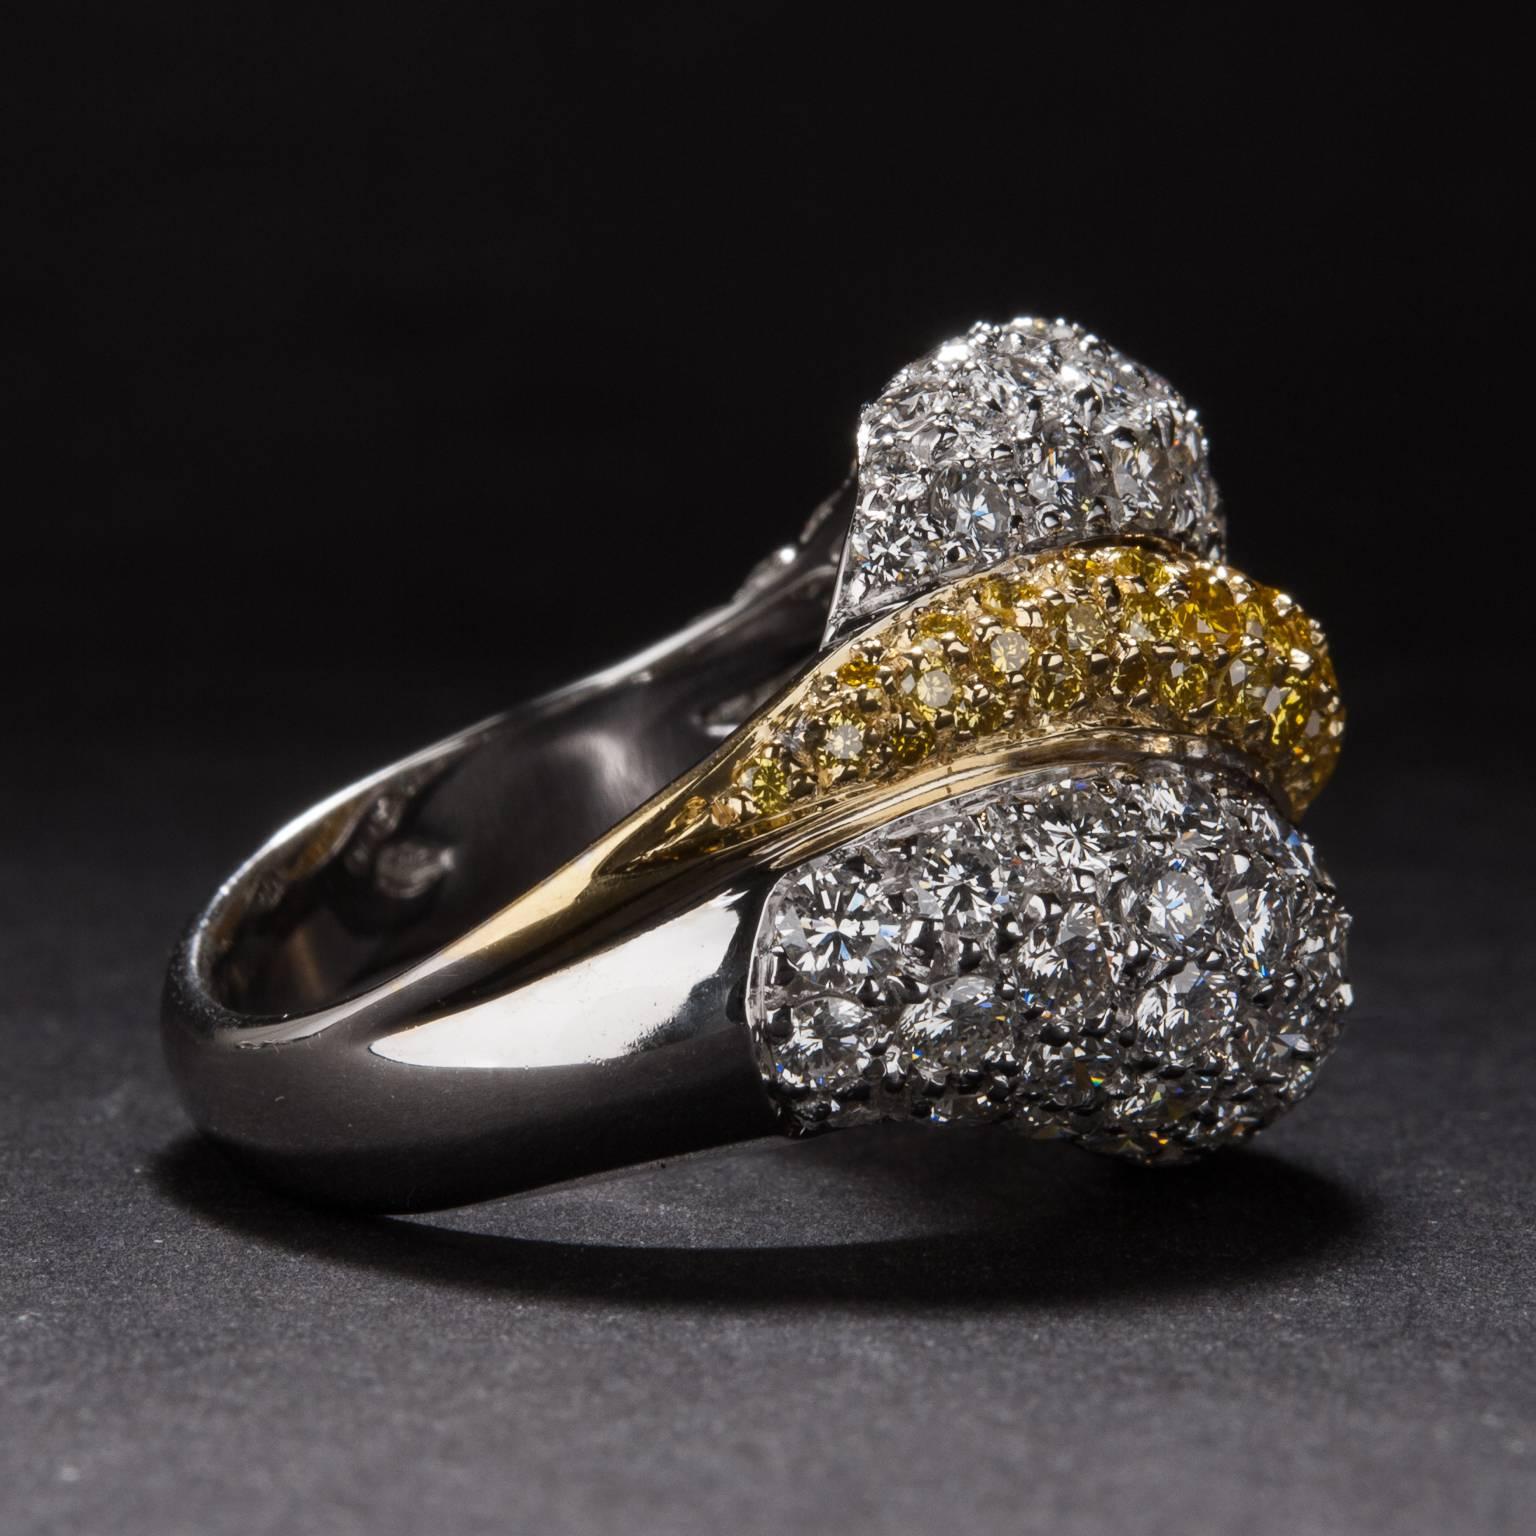 Luca Carati White & Yellow Diamond Two-Tone Gold Ring In Excellent Condition For Sale In Carmel, CA